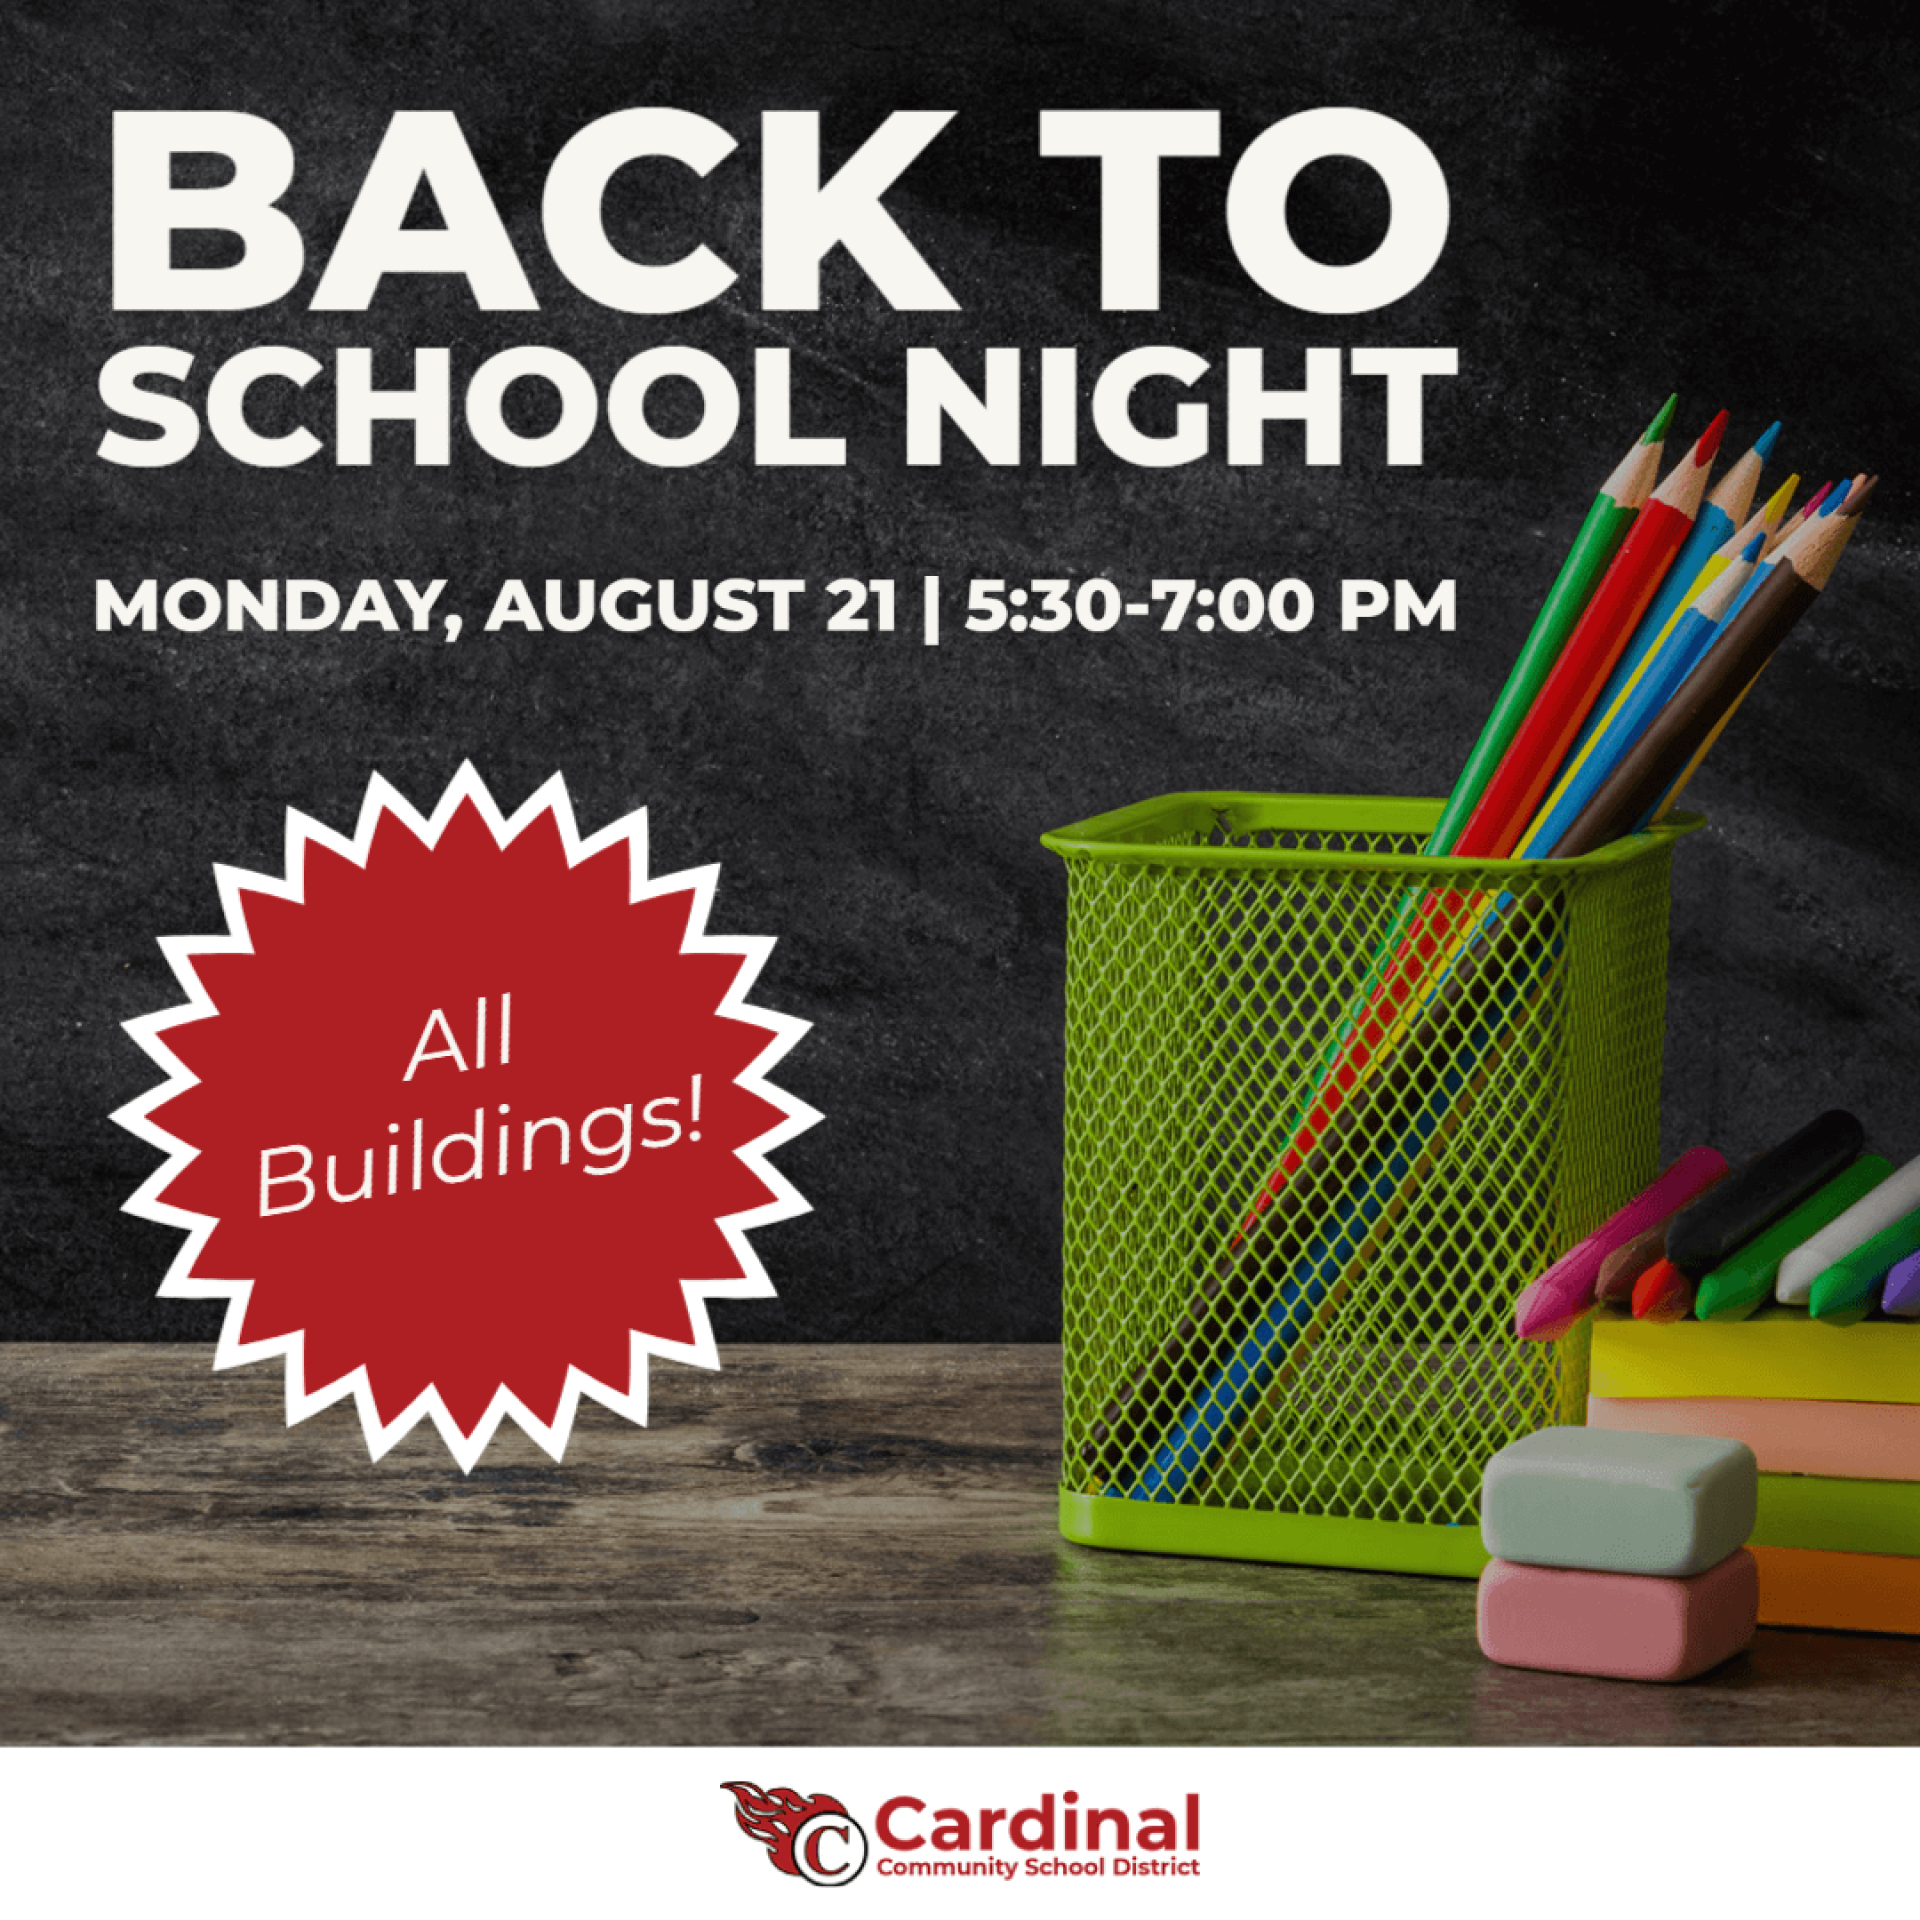 6th-12th Grade Back-to-School Night — Tuesday, Sept. 24; Great Turnout for  Thursday Night's Elementary Back to School Night – Atlantic Christian School